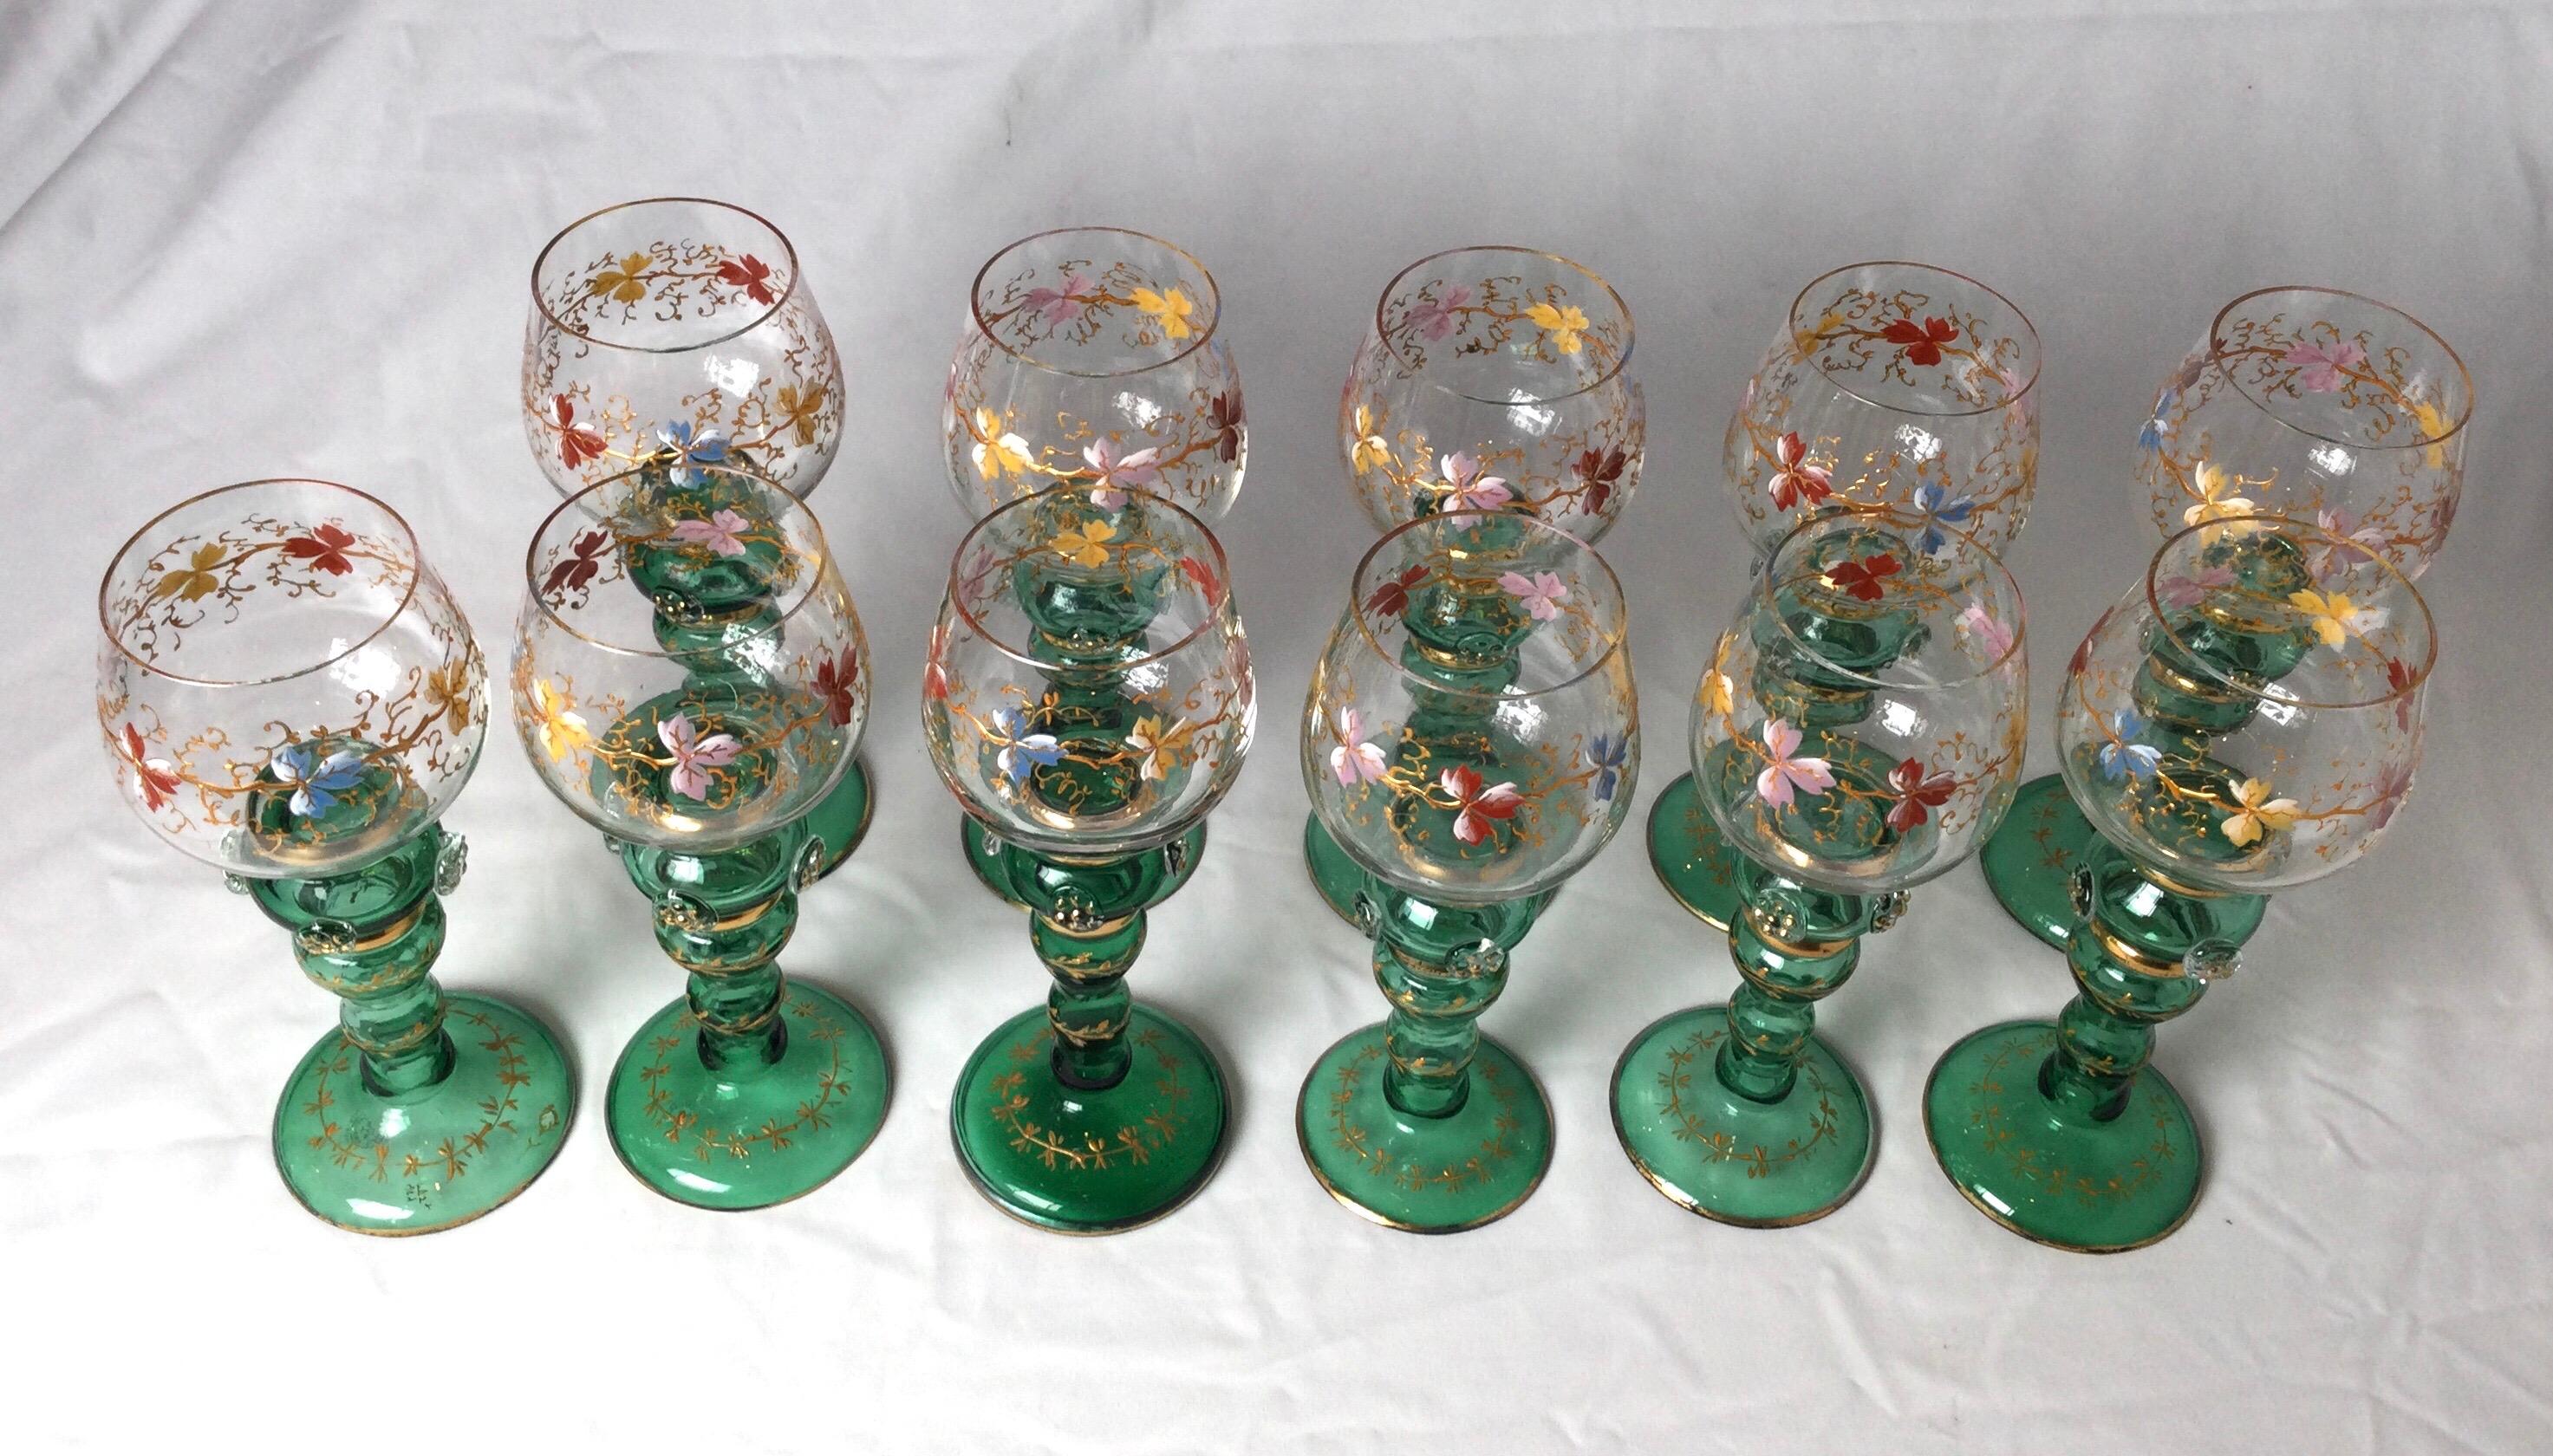 Set of 11 Moser enameled hand painted hand blown glass wine glasses. Each 7 1/4